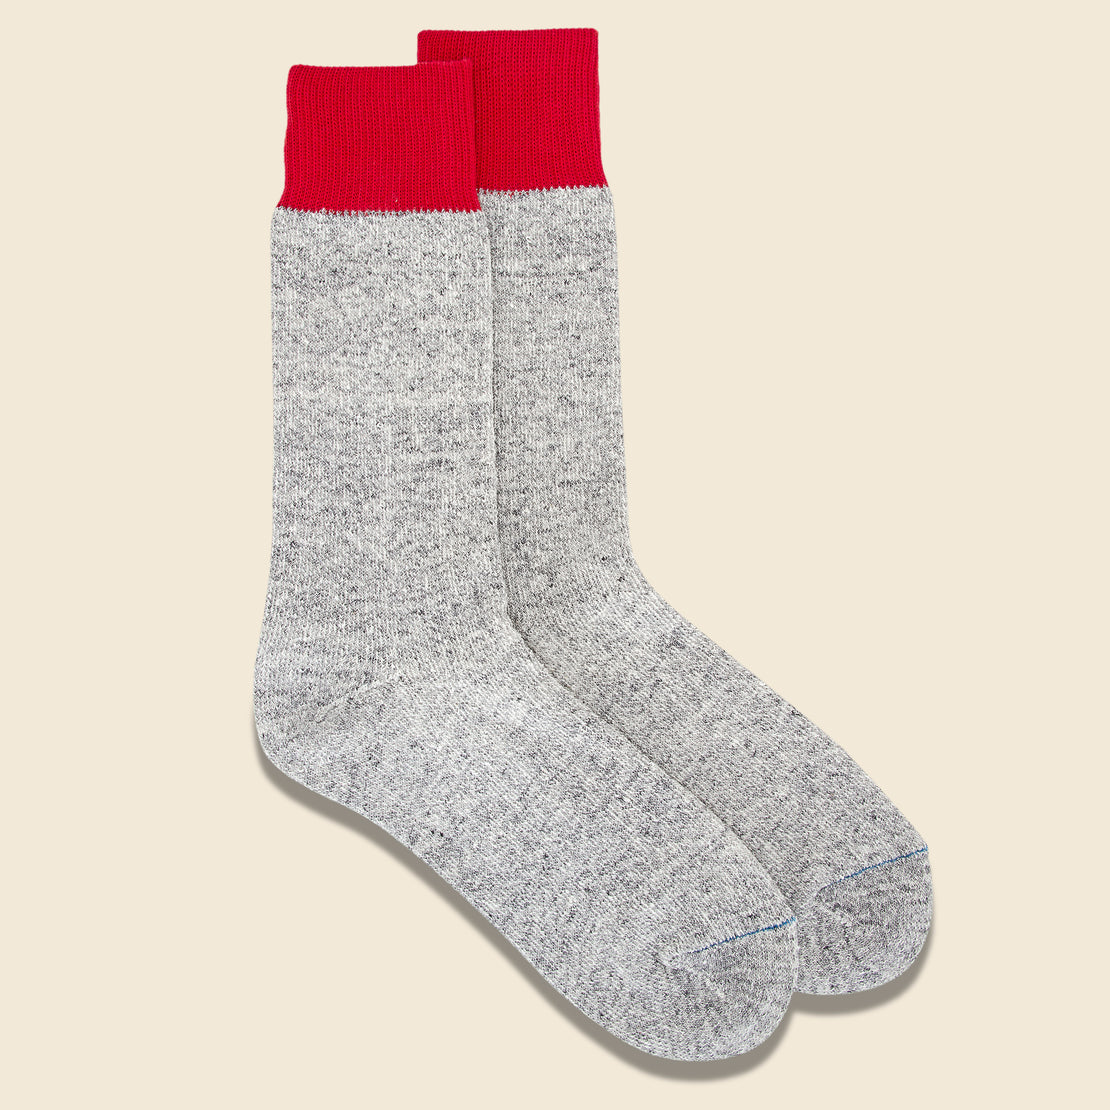 Silk & Cotton Double Face Sock - Red/Light Gray